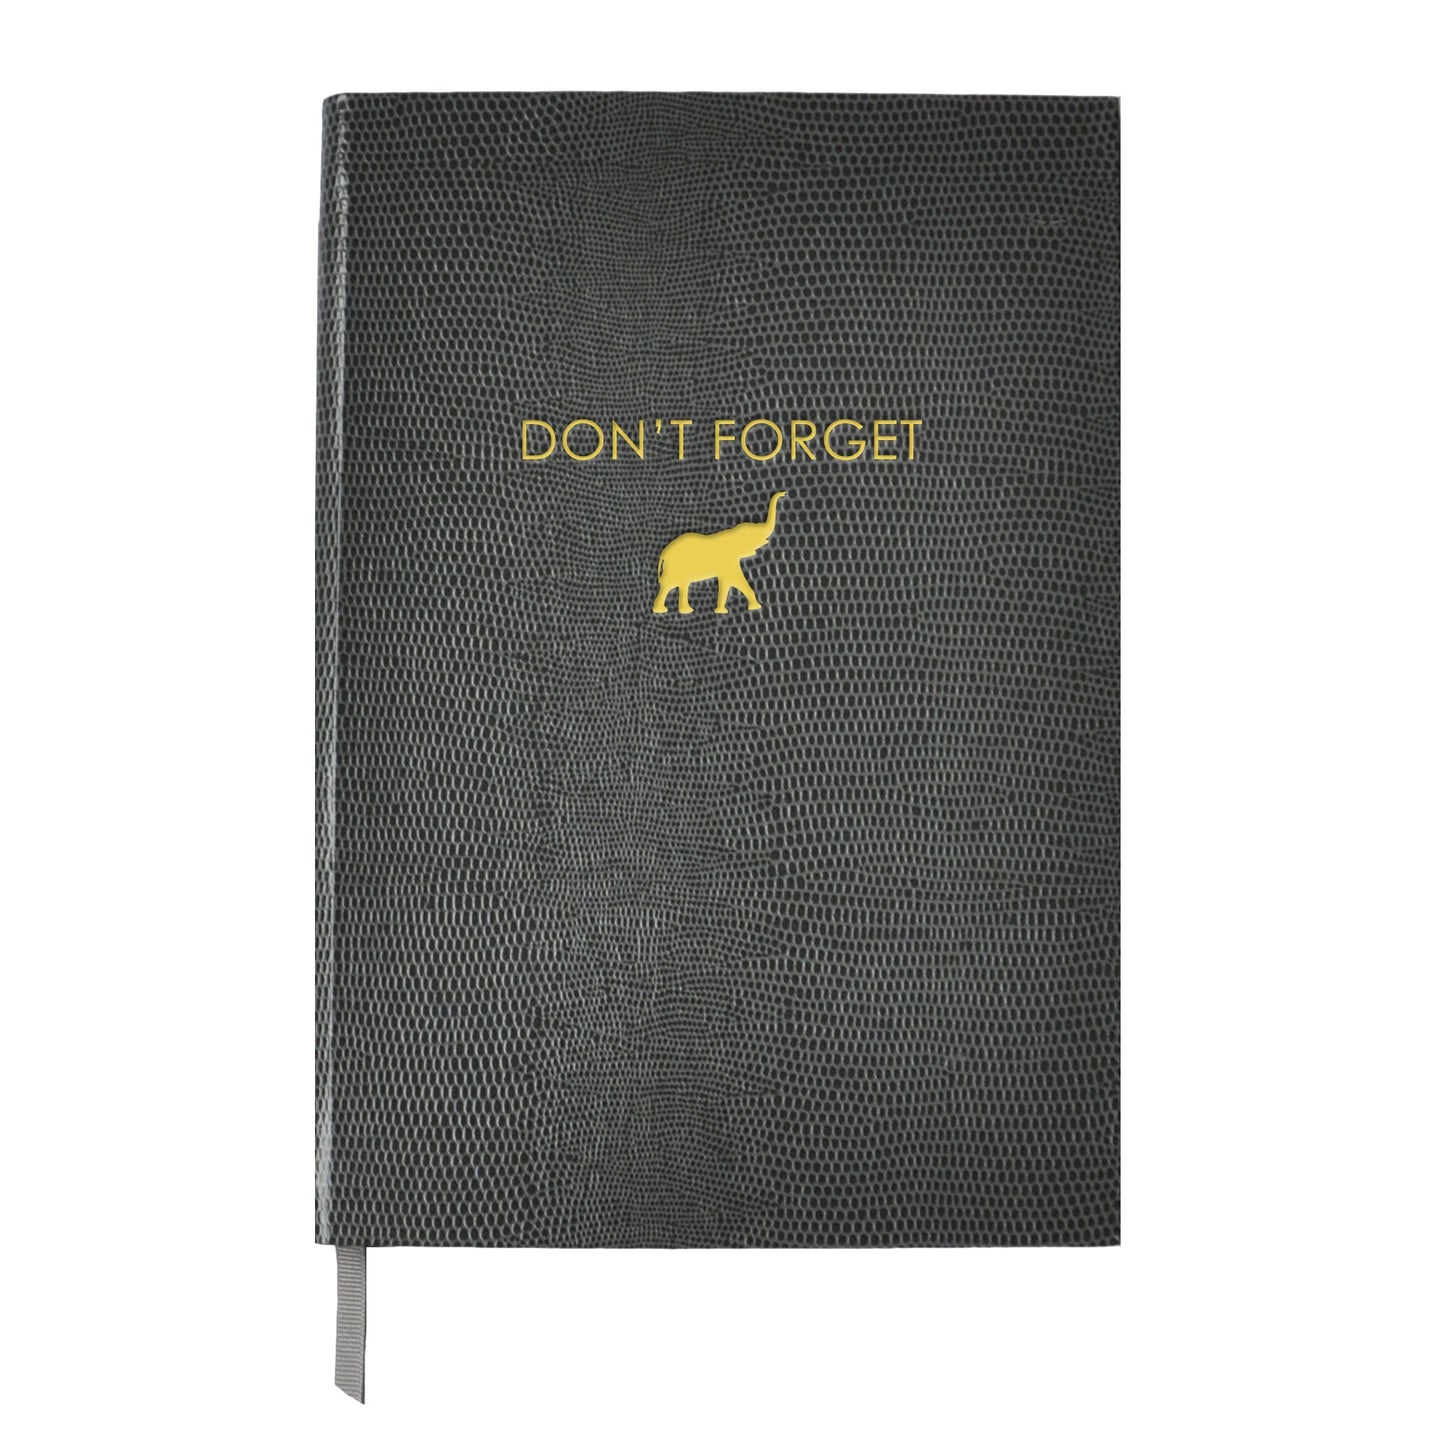 Hardcover Notebook - DON'T FORGET